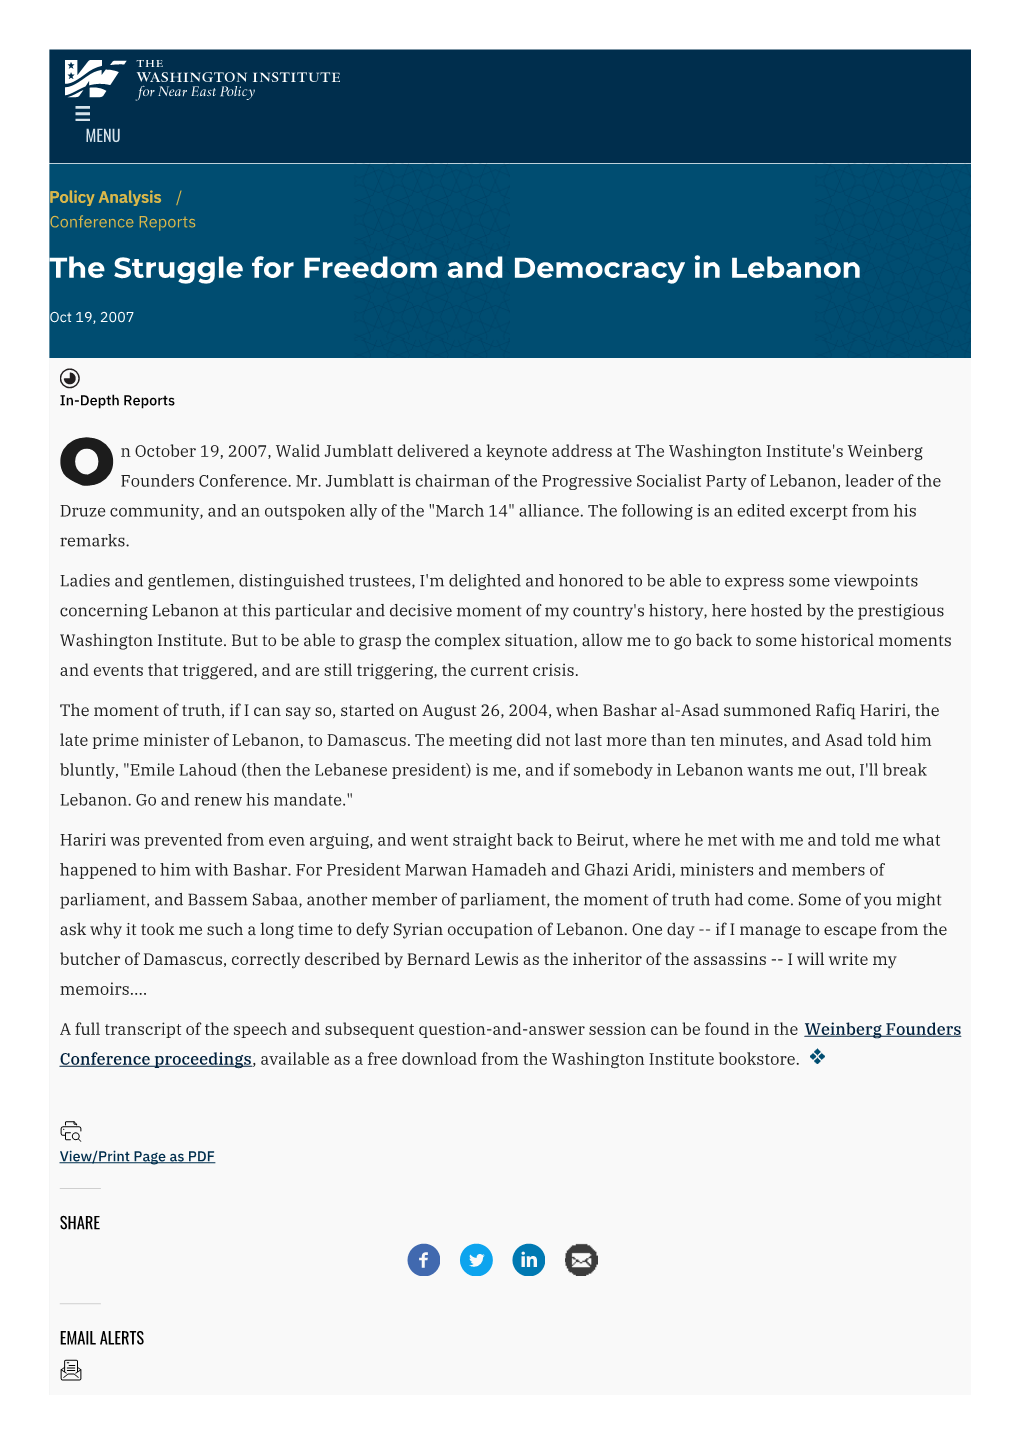 The Struggle for Freedom and Democracy in Lebanon | The